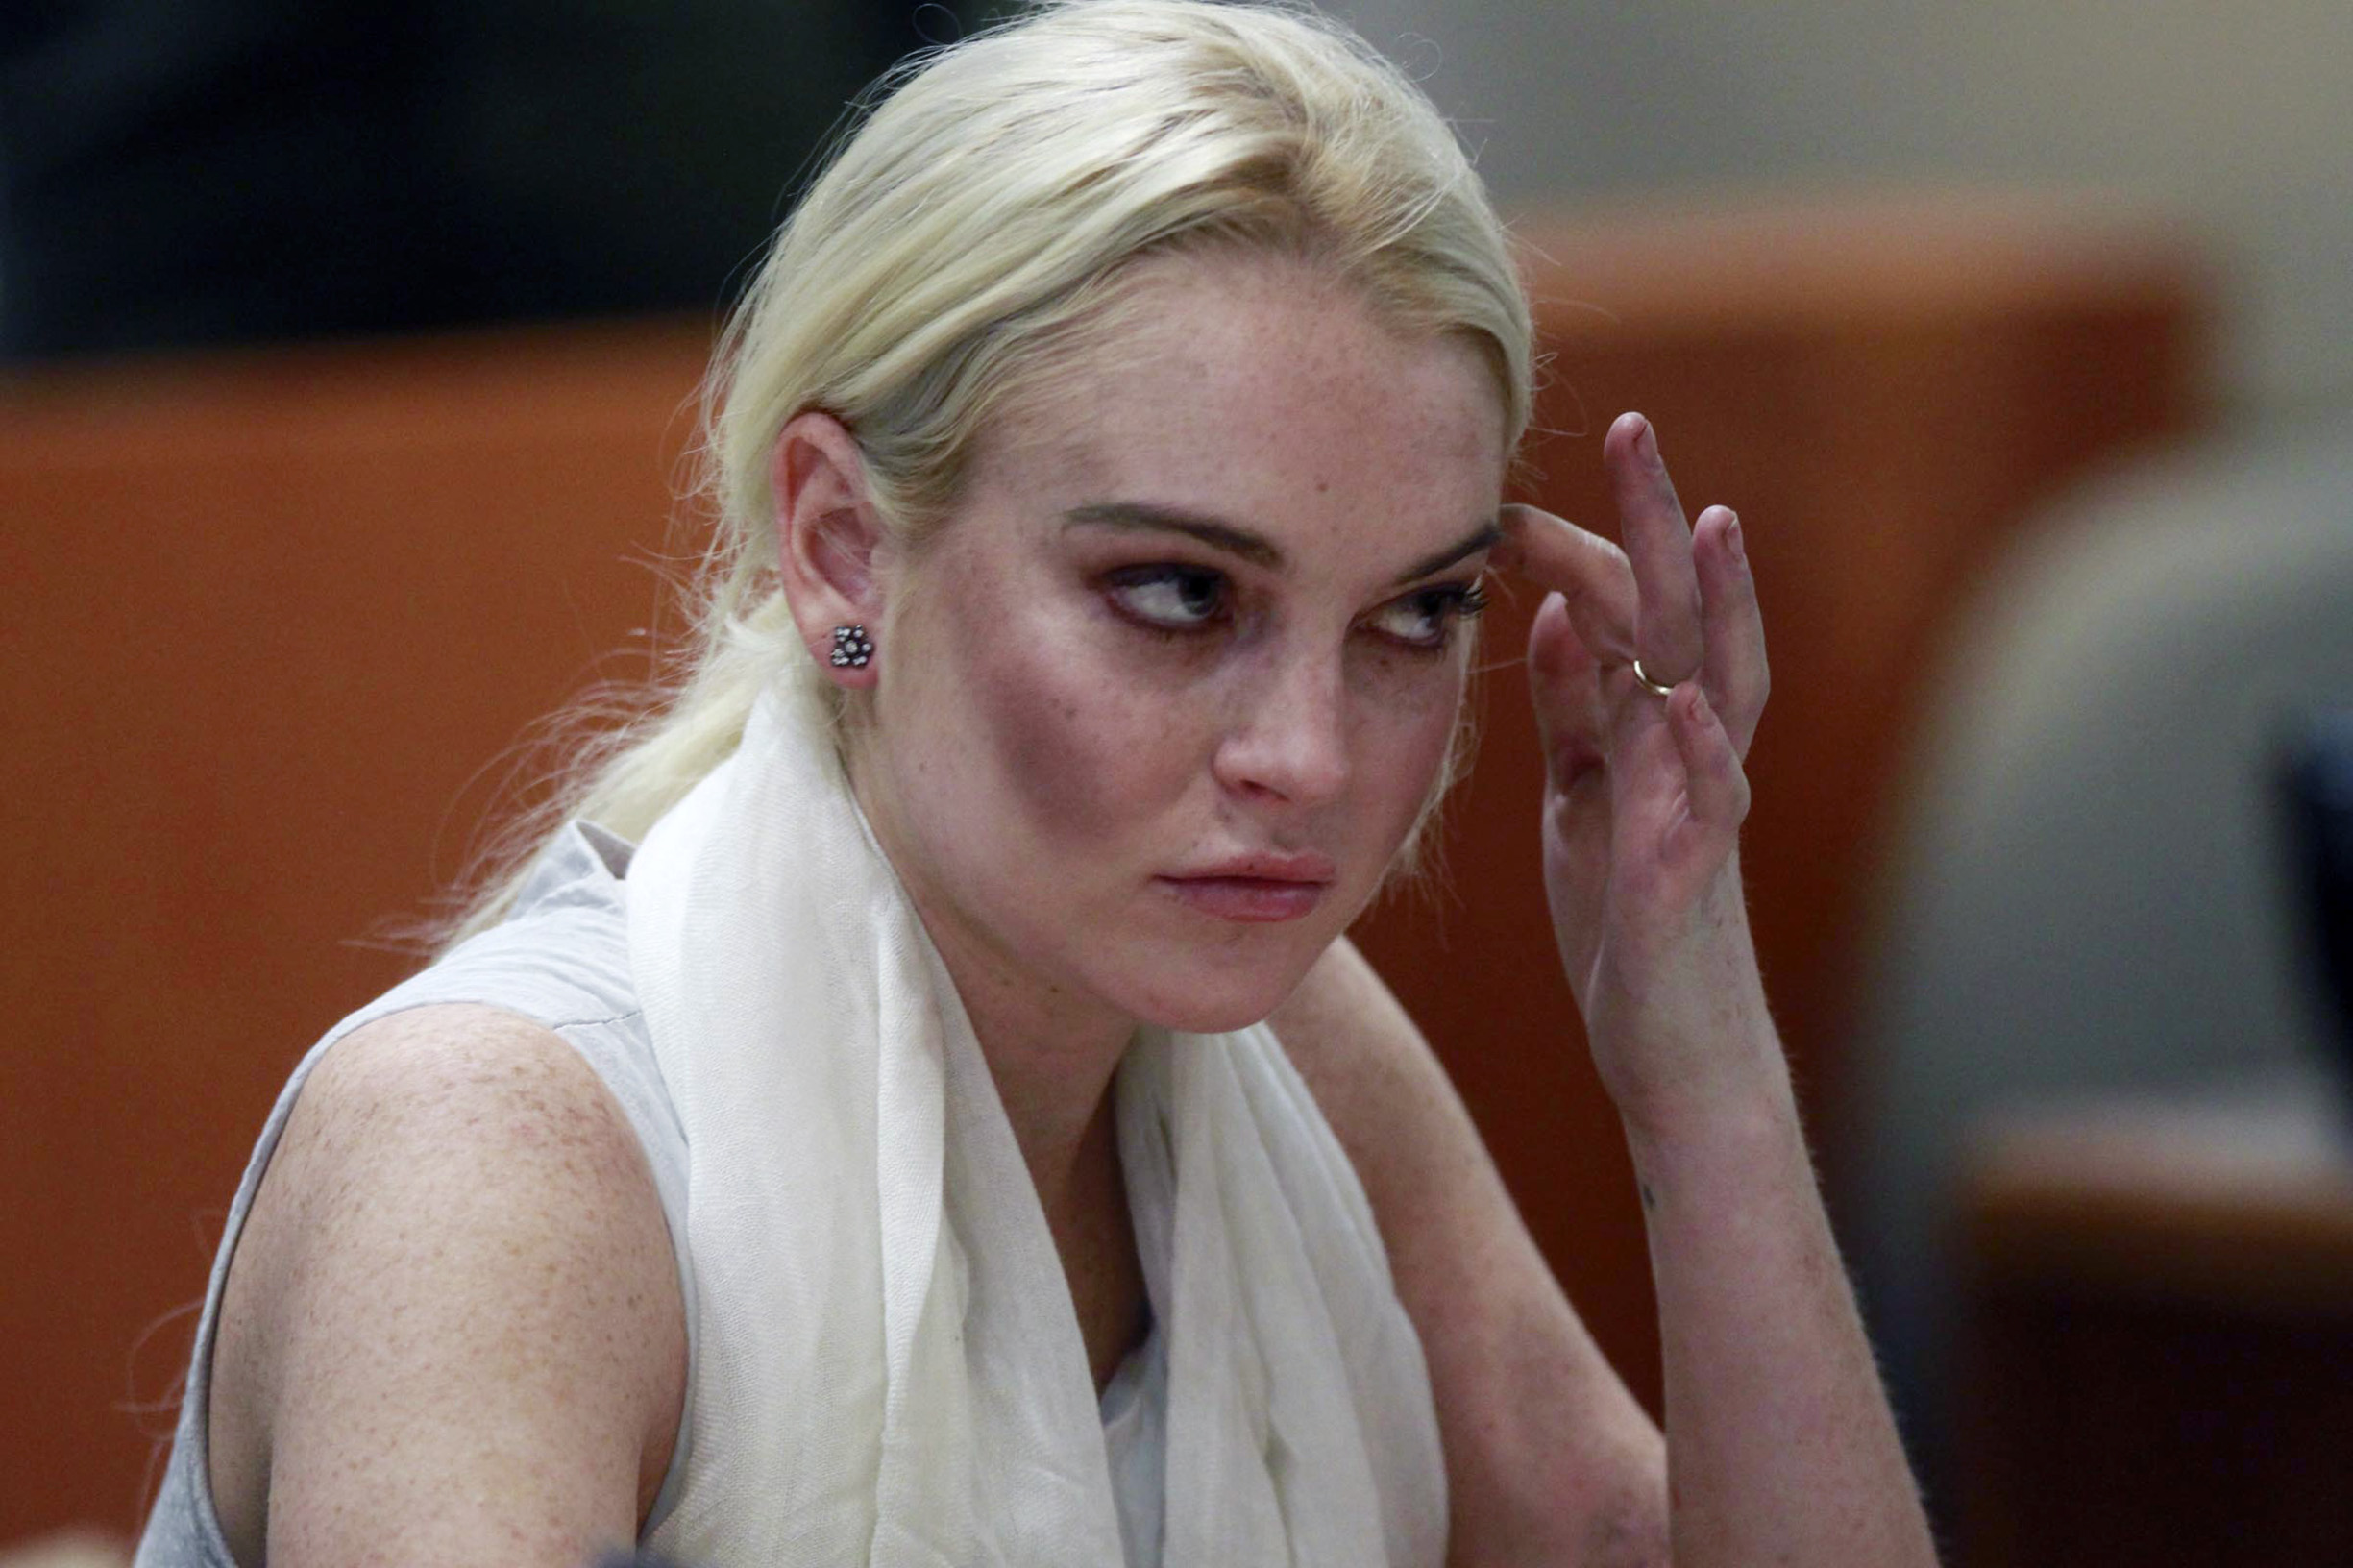 Actress Lindsay Lohan listens as a judge revokes her probation for failing to appear at a series of community service appointments at the Los Angeles Superior Court Airport Branch Courthouse during a progress report hearing in Los Angeles on October 19, 2011., Image: 105054848, License: Rights-managed, Restrictions: , Model Release: no, Credit line: MARK BOSTER / UPI / Profimedia